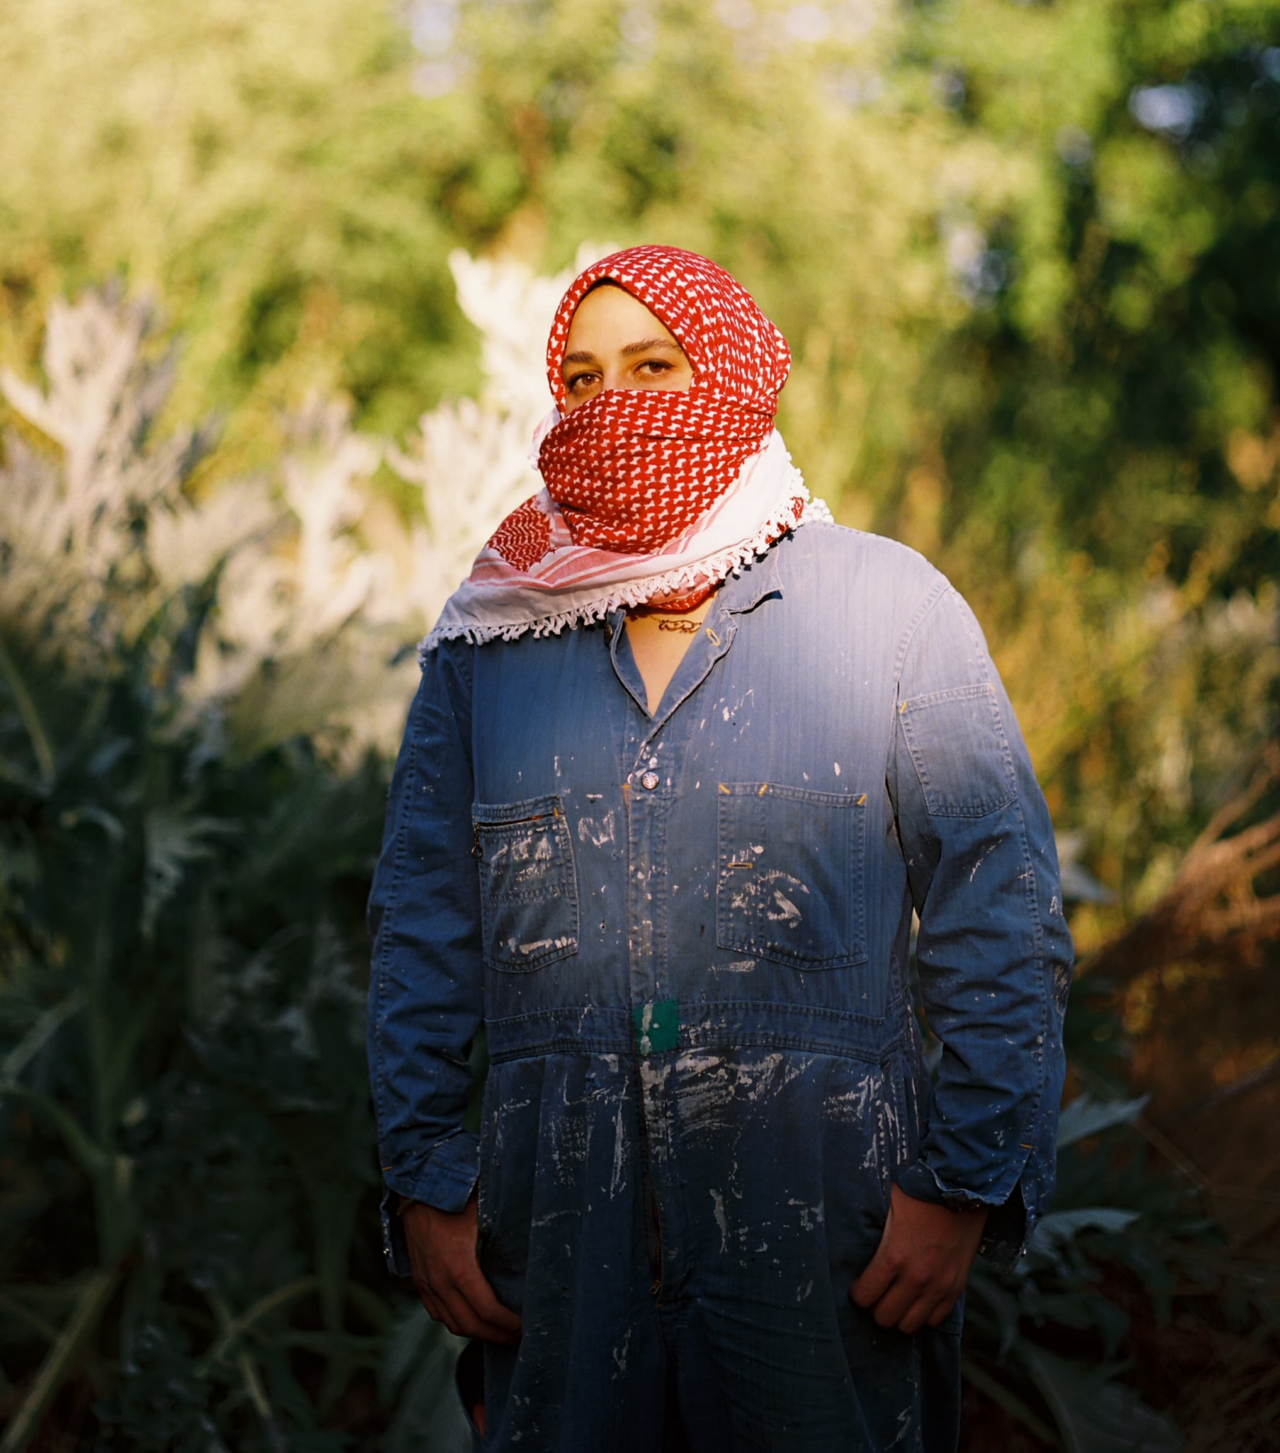 A photograph of Zeina Baltagi with pale brown skin, brown eyes and eyebrows standing in natural foliage. She is wearing blue Lee Can't Bust Em 1940s Union cover-alls, tan work boots, and a red and white patterned keffiyeh scarf around her neck which covers her nose and mouth. Her thumbs rest in her pockets.